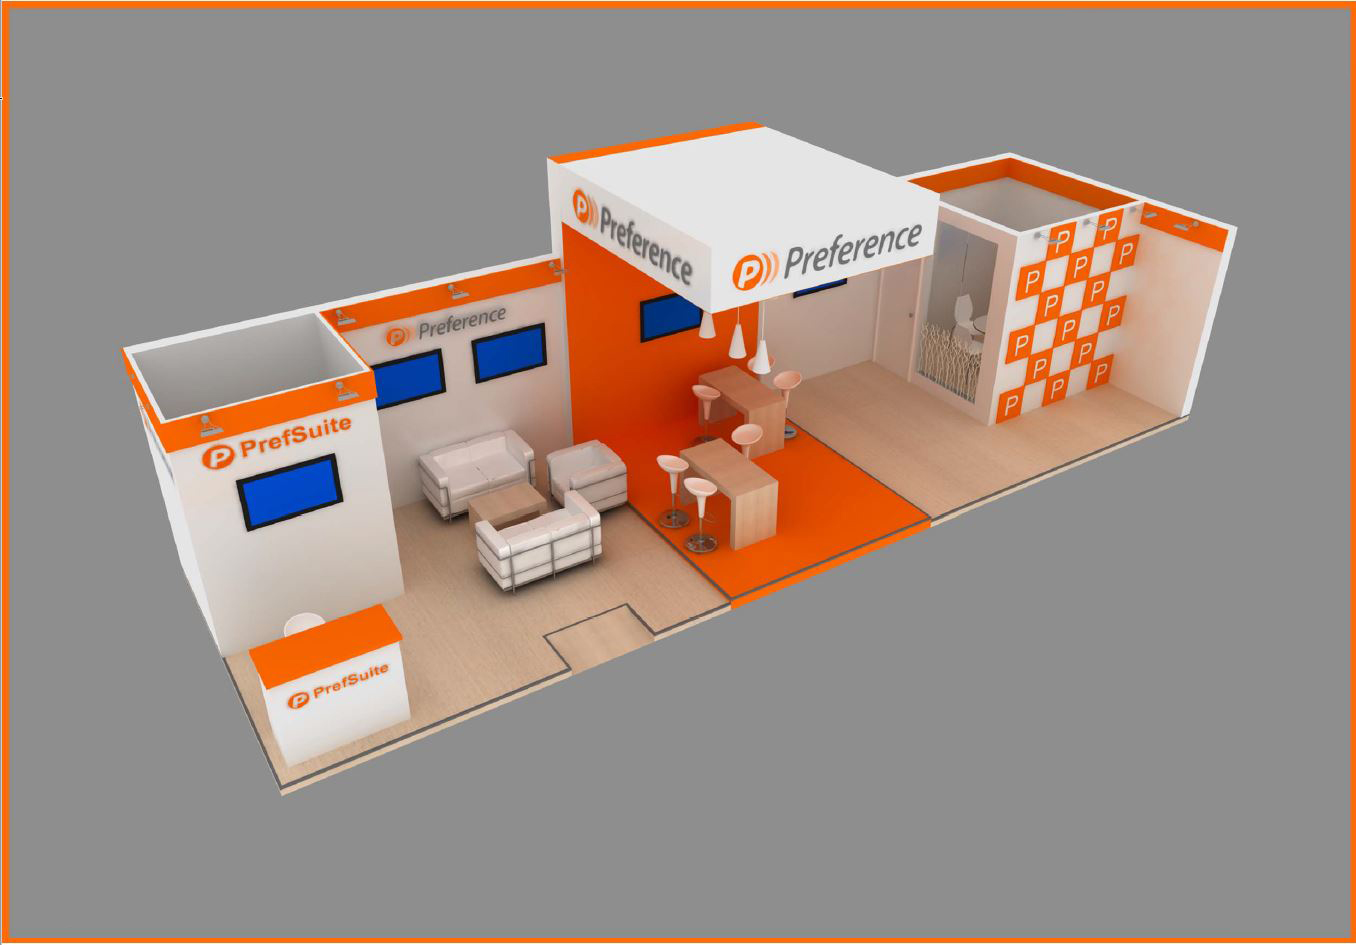 Stand Design for Preference at Veteco